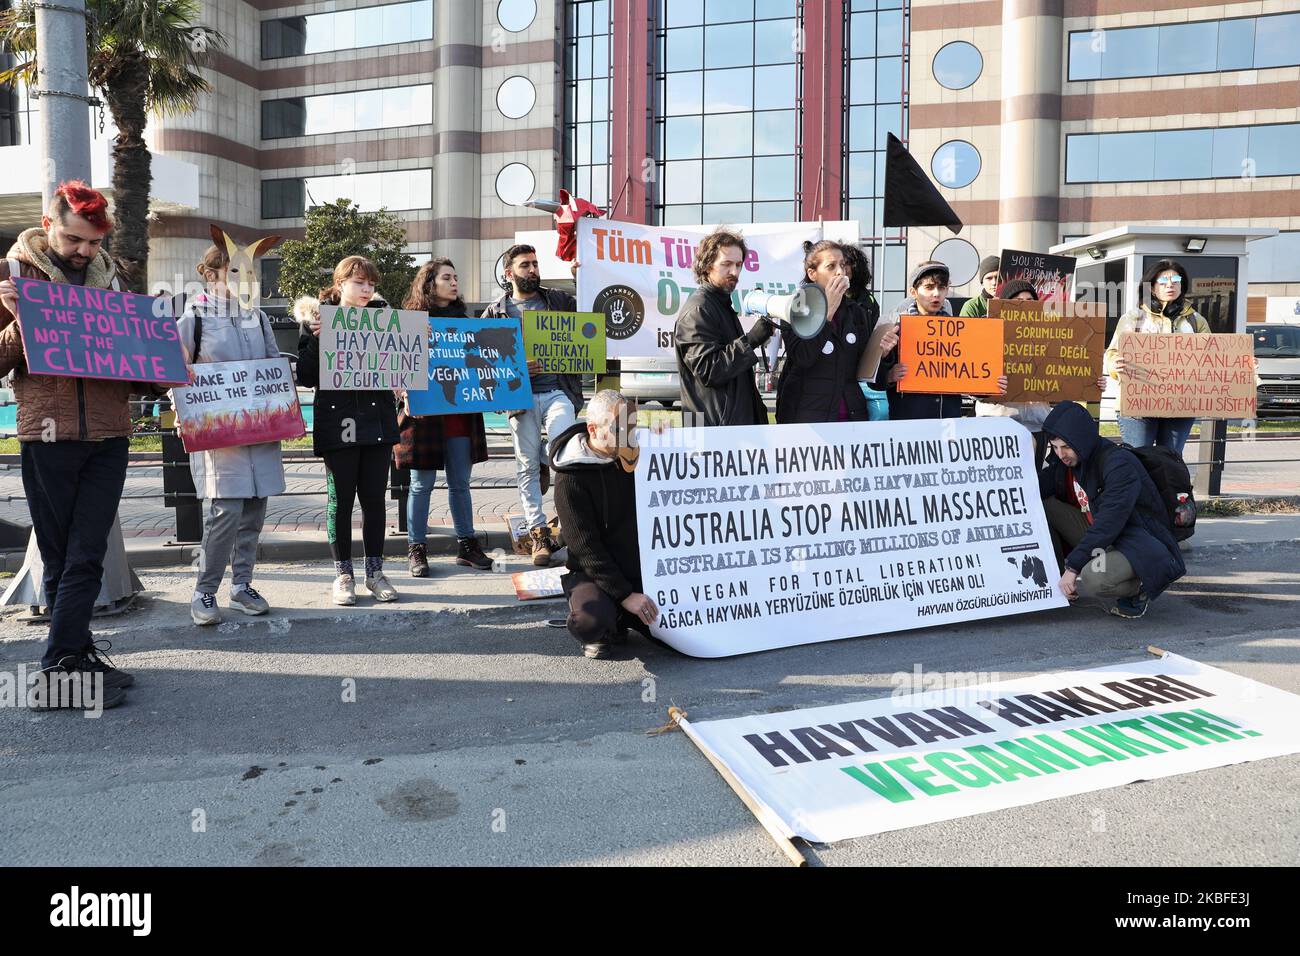 Activists of The Animal Freedom Initiative protested Australia, which they claimed was planning to kill camels and cats, before the Australian Consulate General in Istanbul, Turkey on January 26, 2020. (Photo by Onur Dogman/NurPhoto) Stock Photo